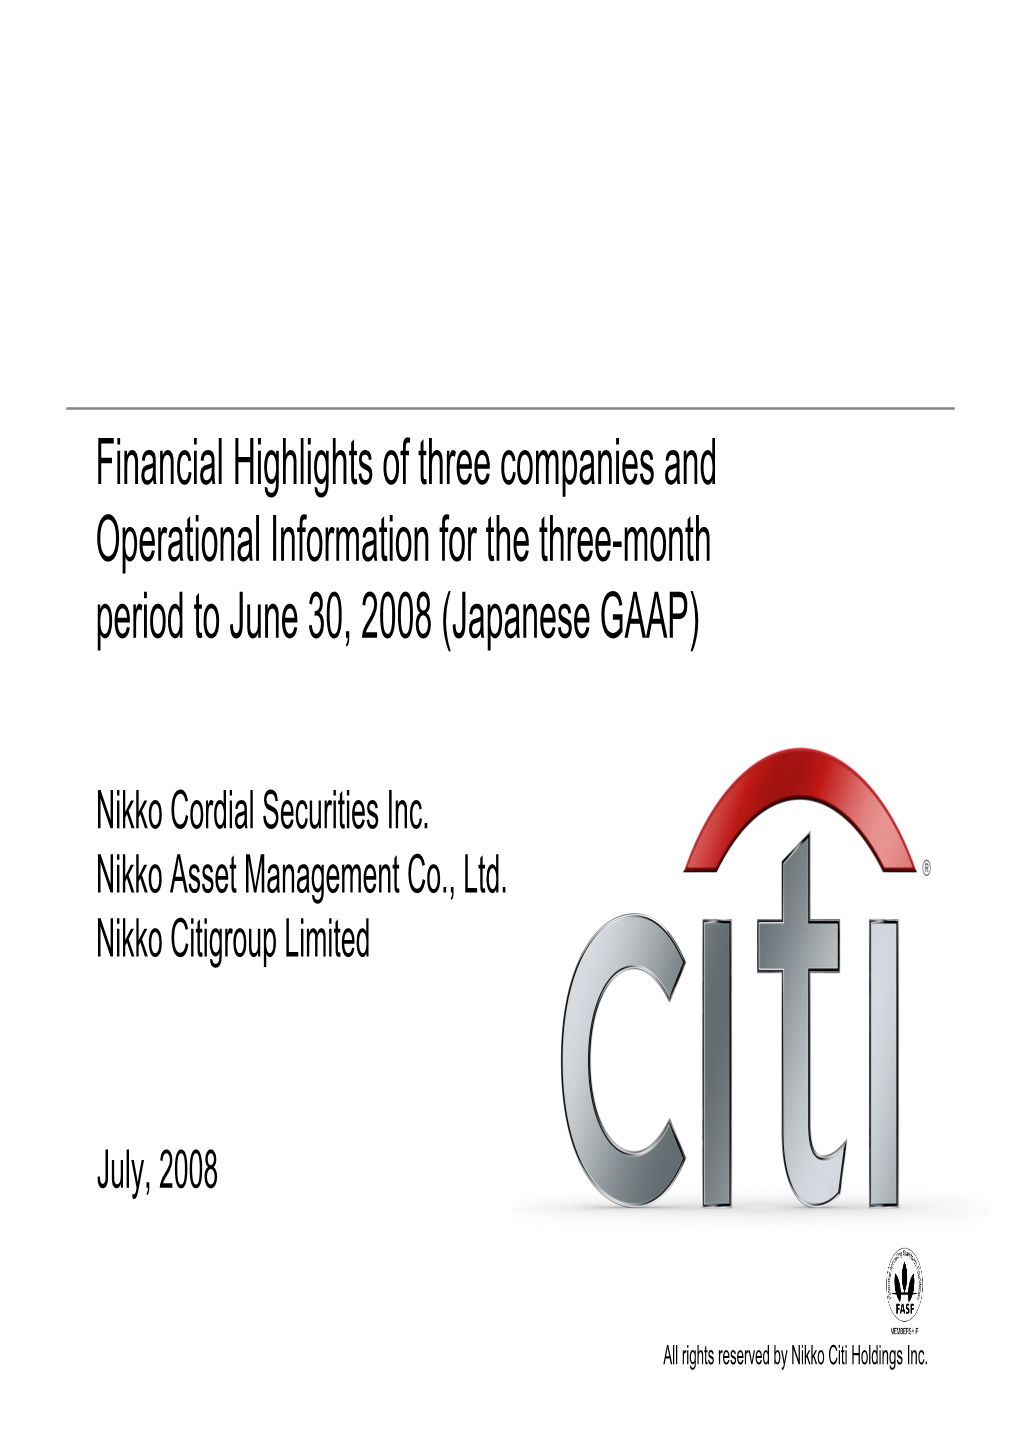 Financial Highlights of Three Companies and Operational Information for the Three-Month Period to June 30, 2008 (Japanese GAAP)